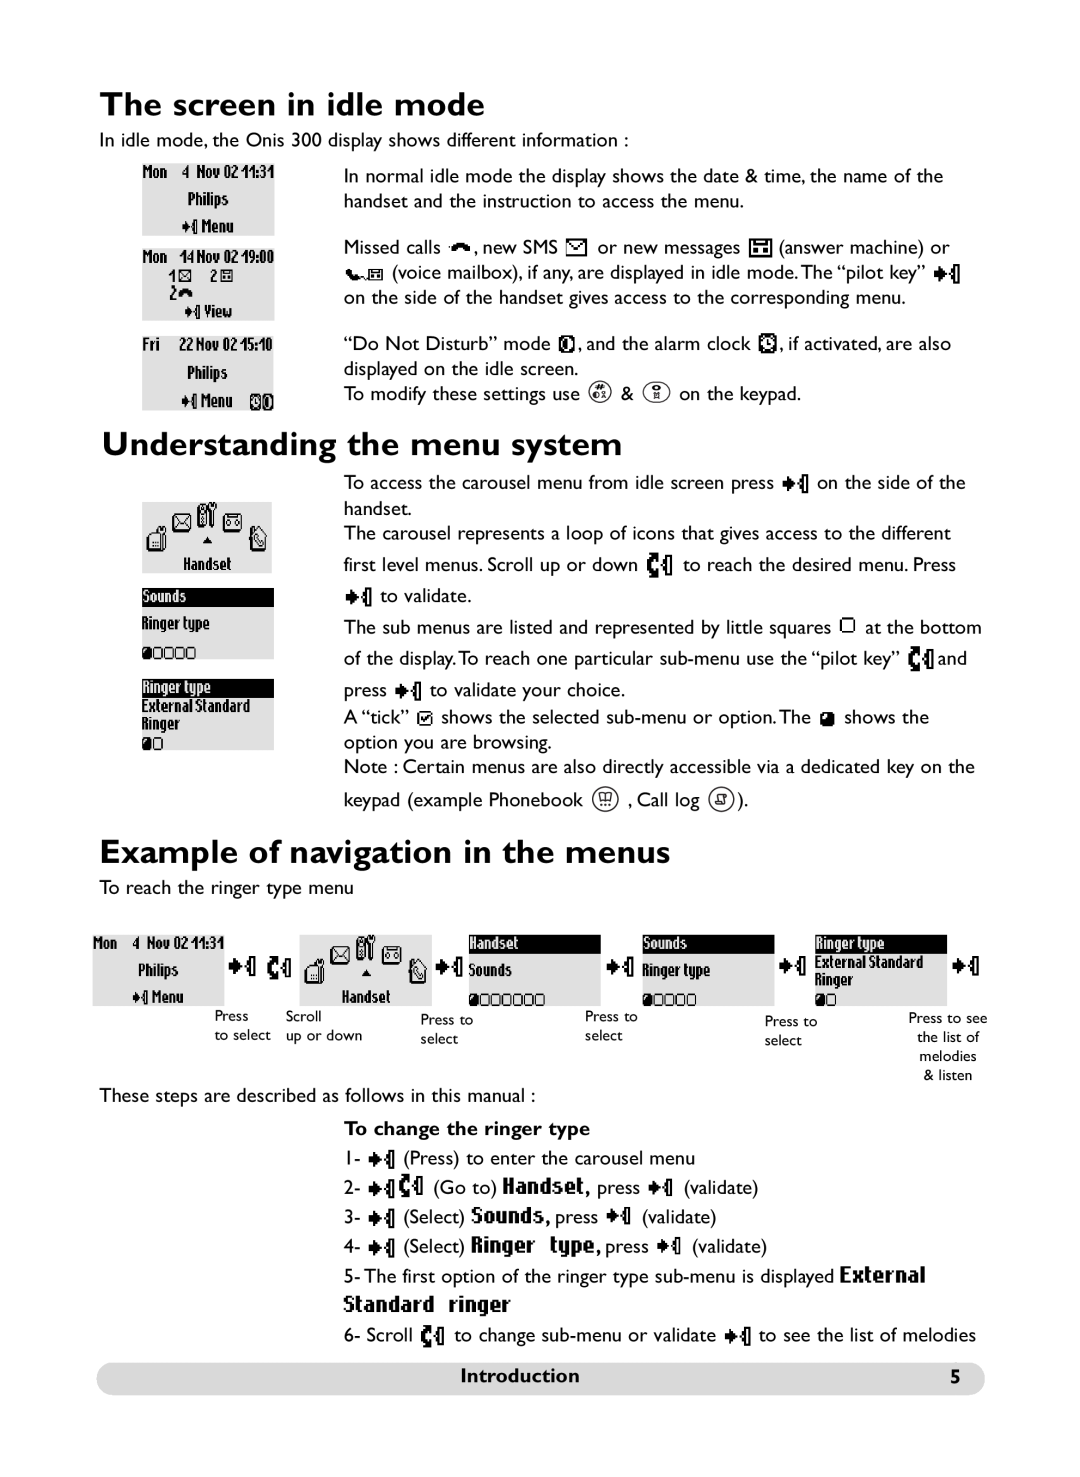 Philips Onis 300 Vox manual The screen in idle mode, Understanding the menu system, Example of navigation in the menus 